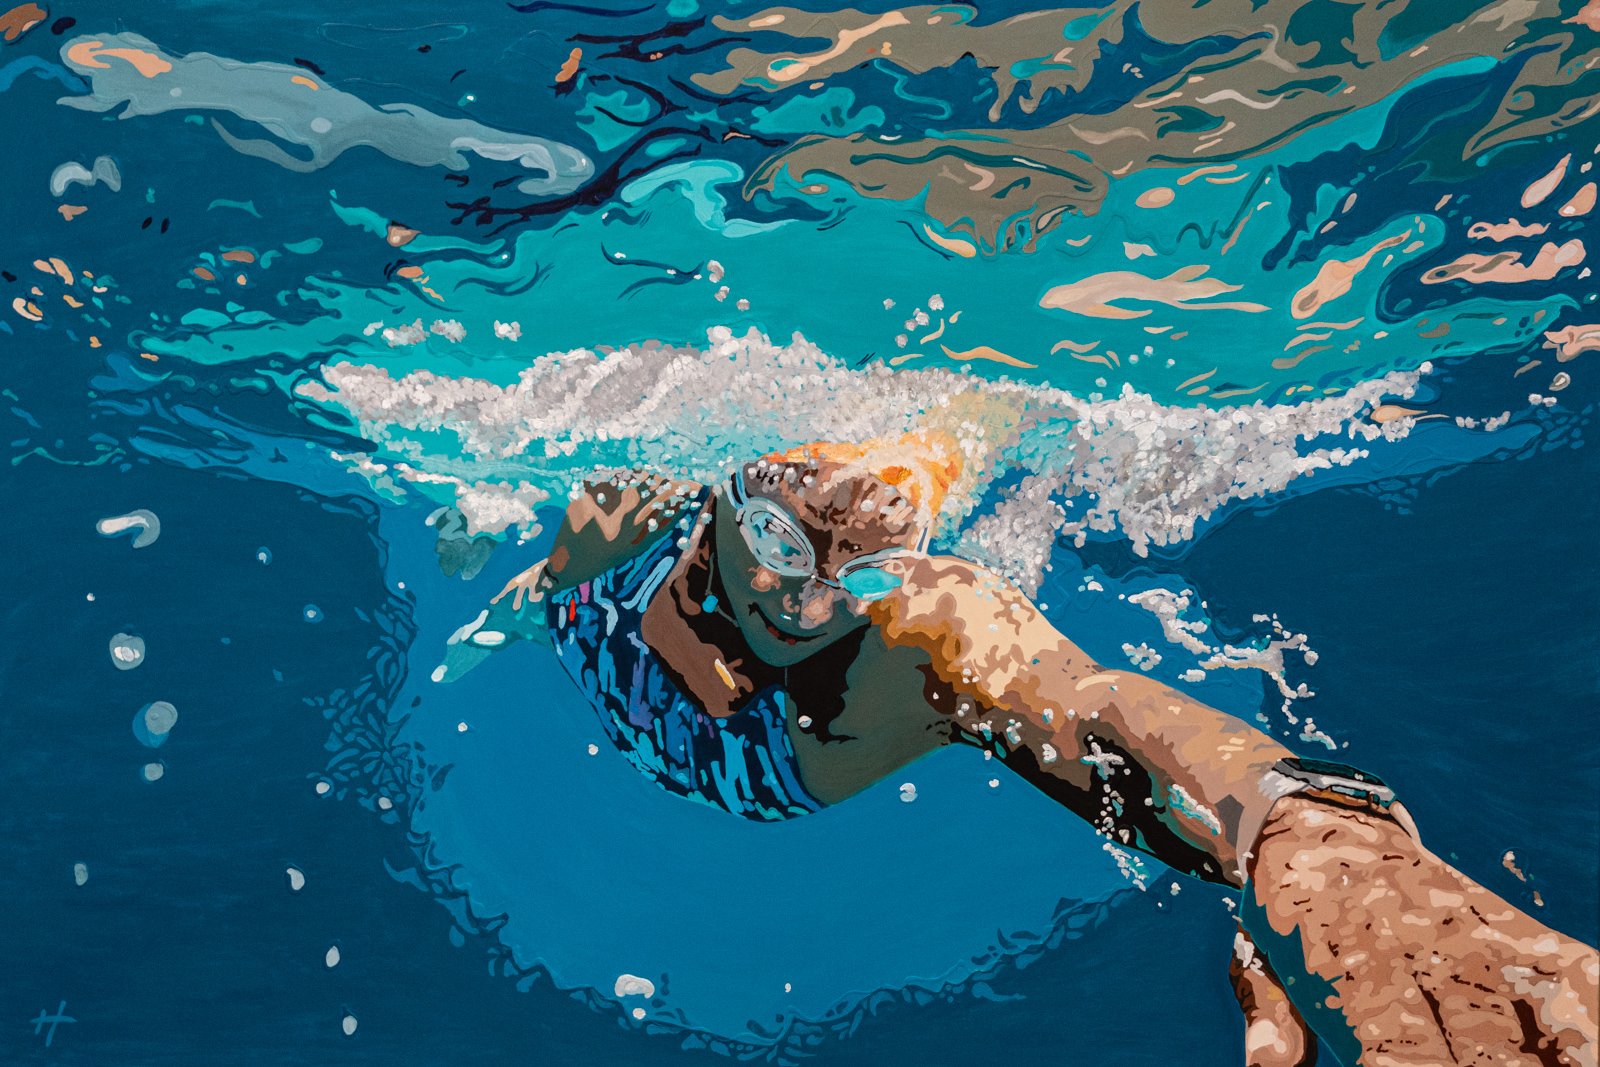 Heather Perry's underwater painting of a swimmer cutting through the water towards the viewer